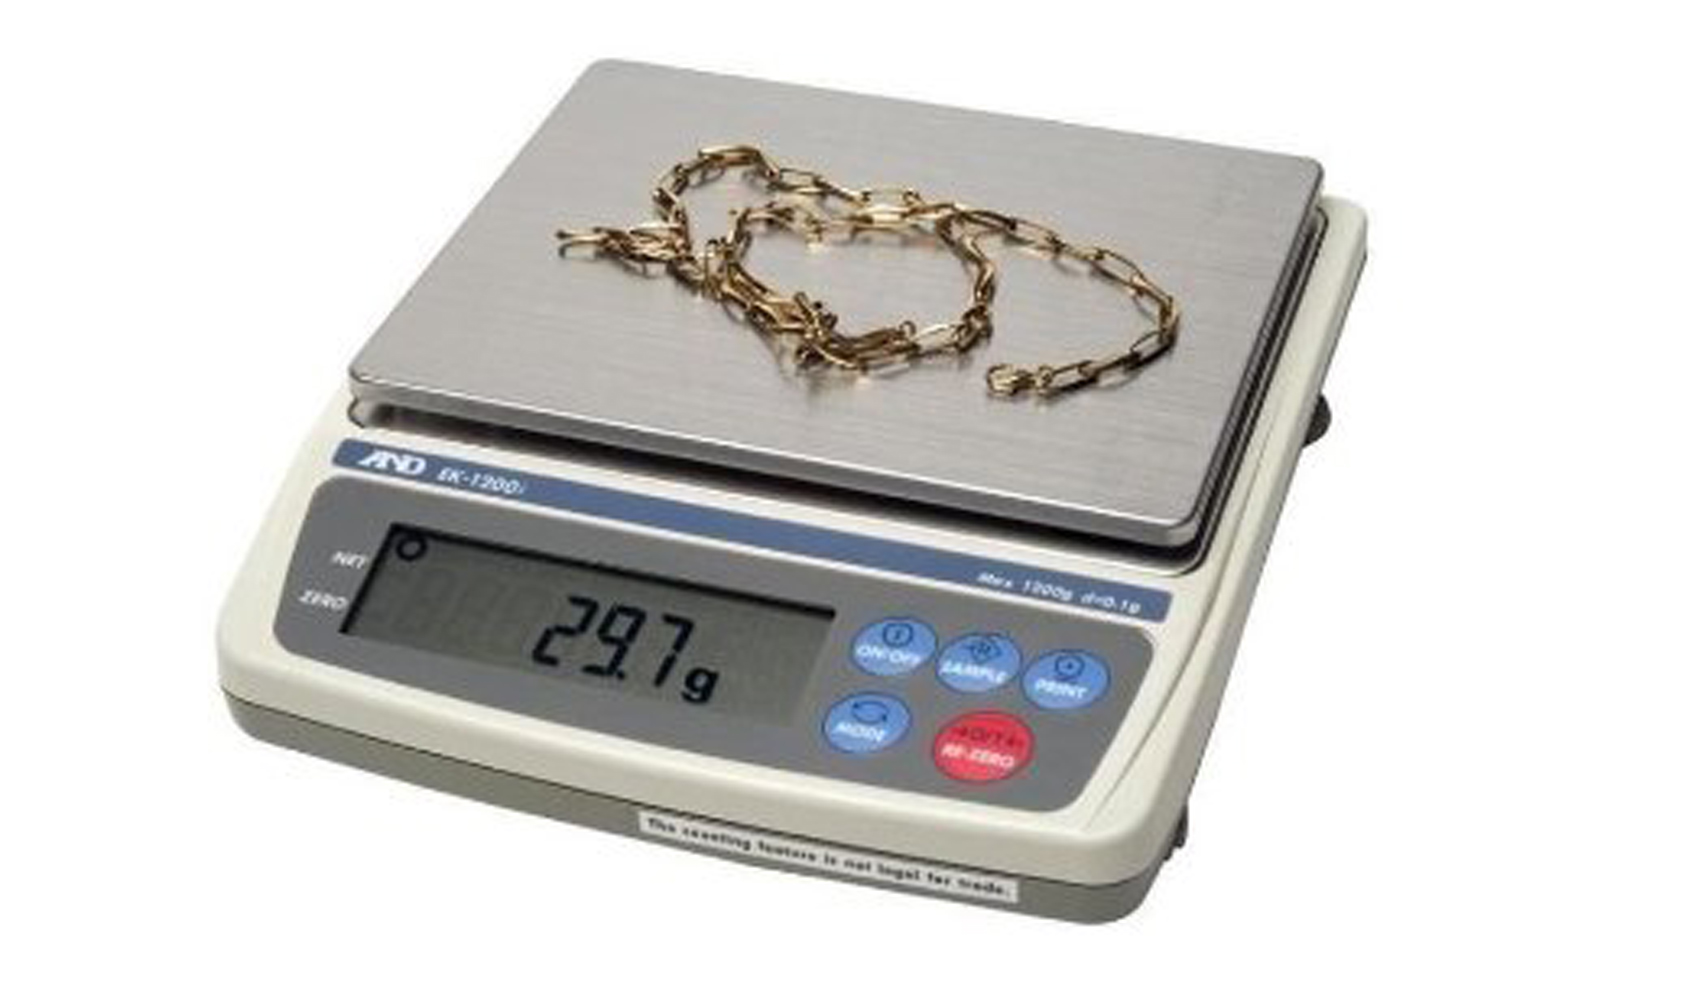 SCALE A&D LEGAL FOR TRADE 1200 GRAMS - Click Image to Close